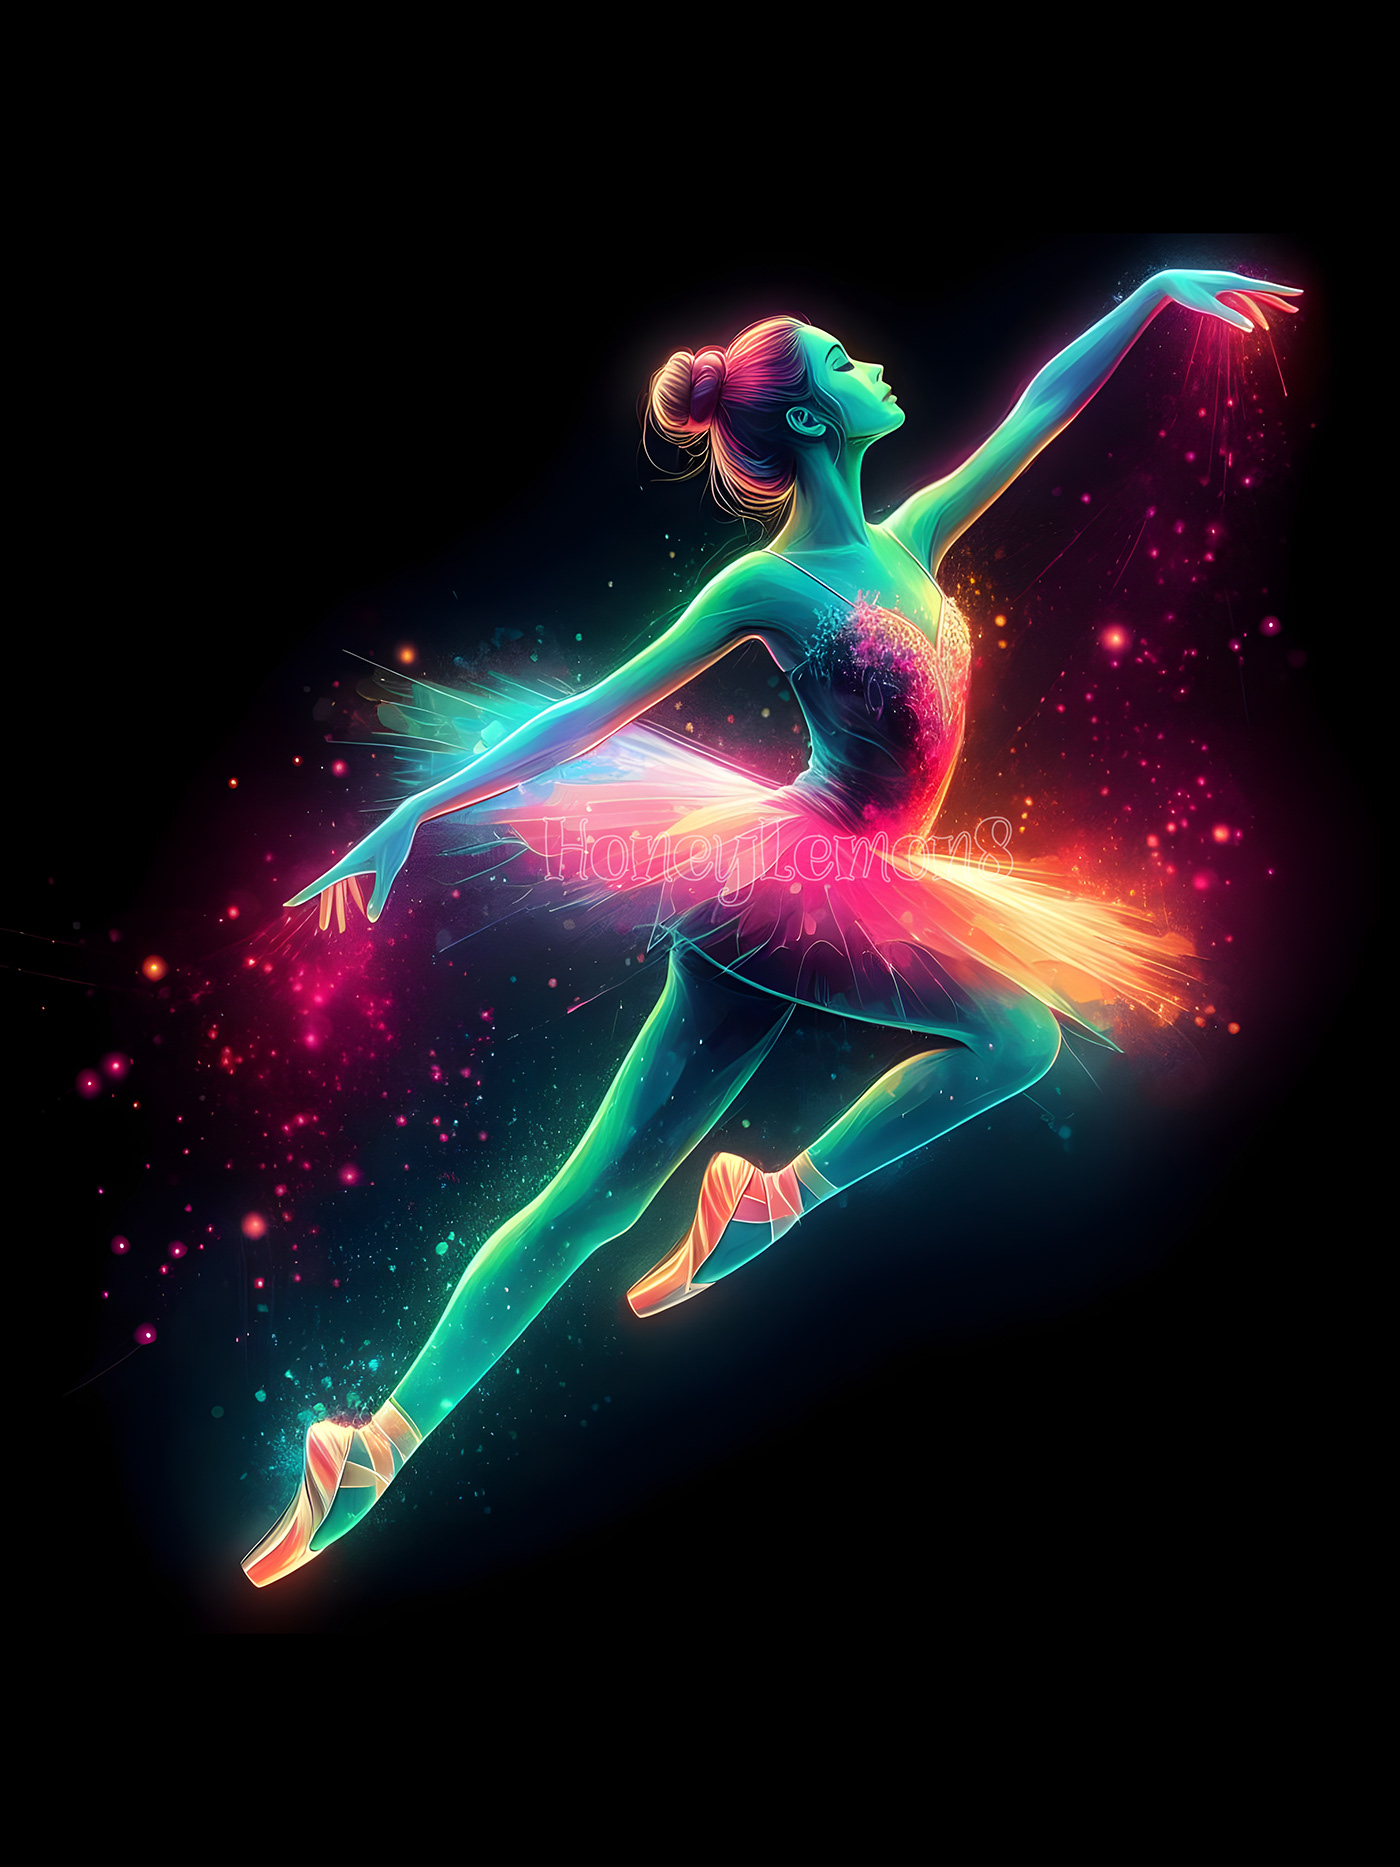 A ballet dancer glows in the dark, surrounded by neon colors that create a stunning visual effect.